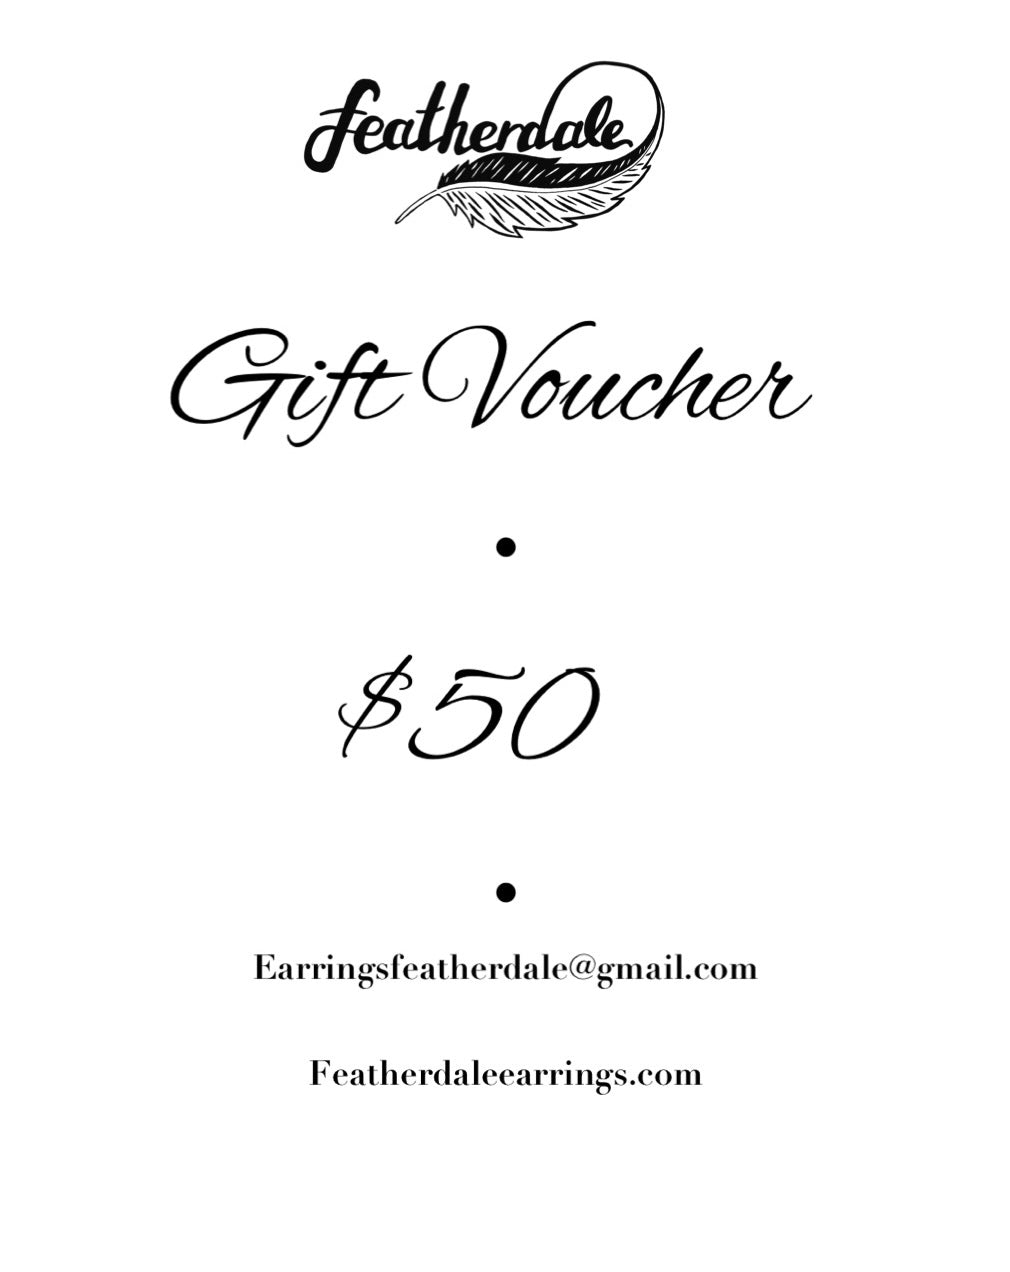 Featherdale Gift Voucher